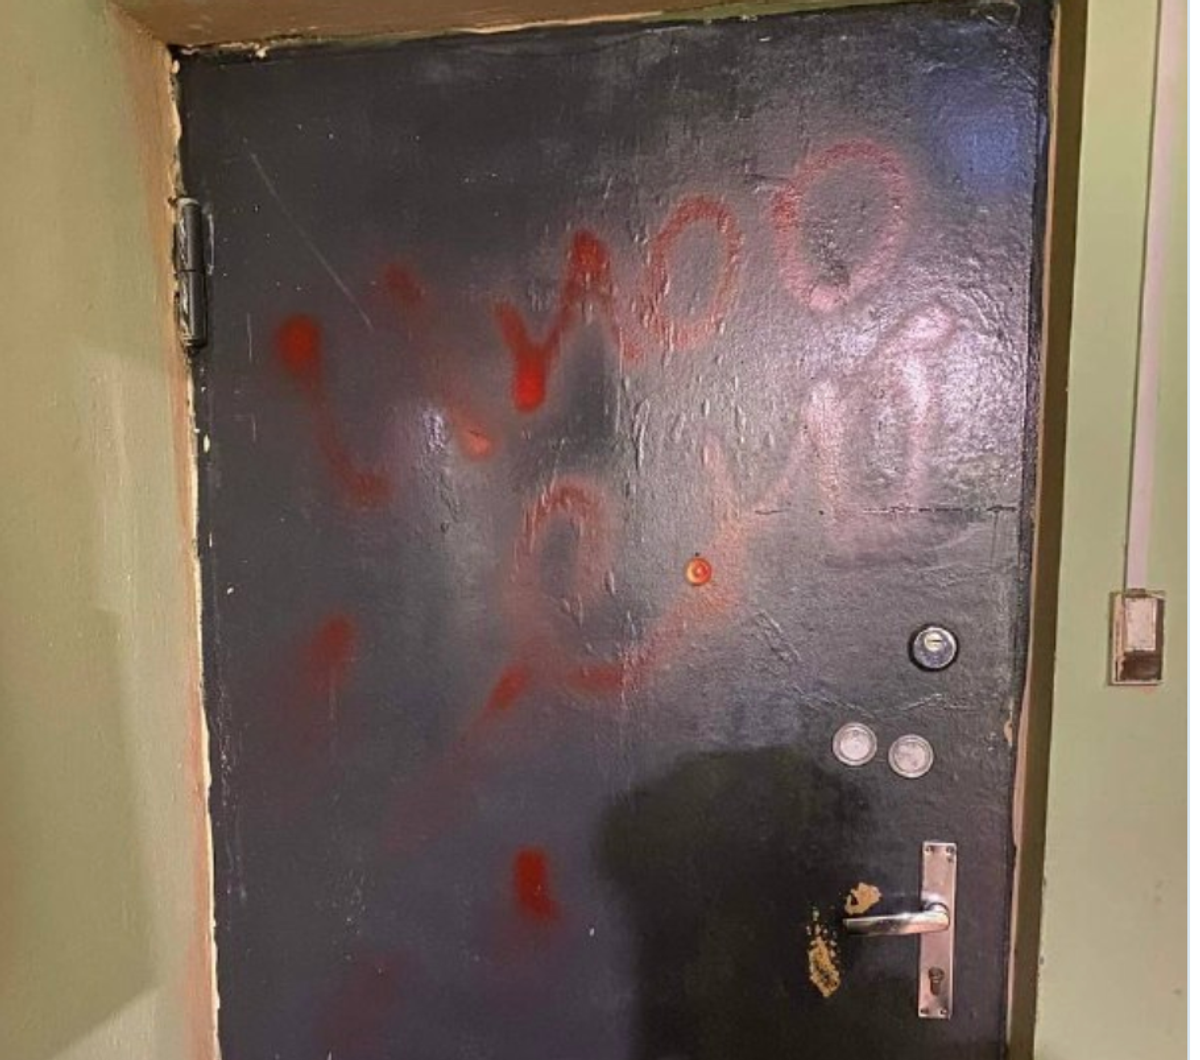 The human rights lawyer Pavel Chikov posted a photo of the door on his Telegram channel 